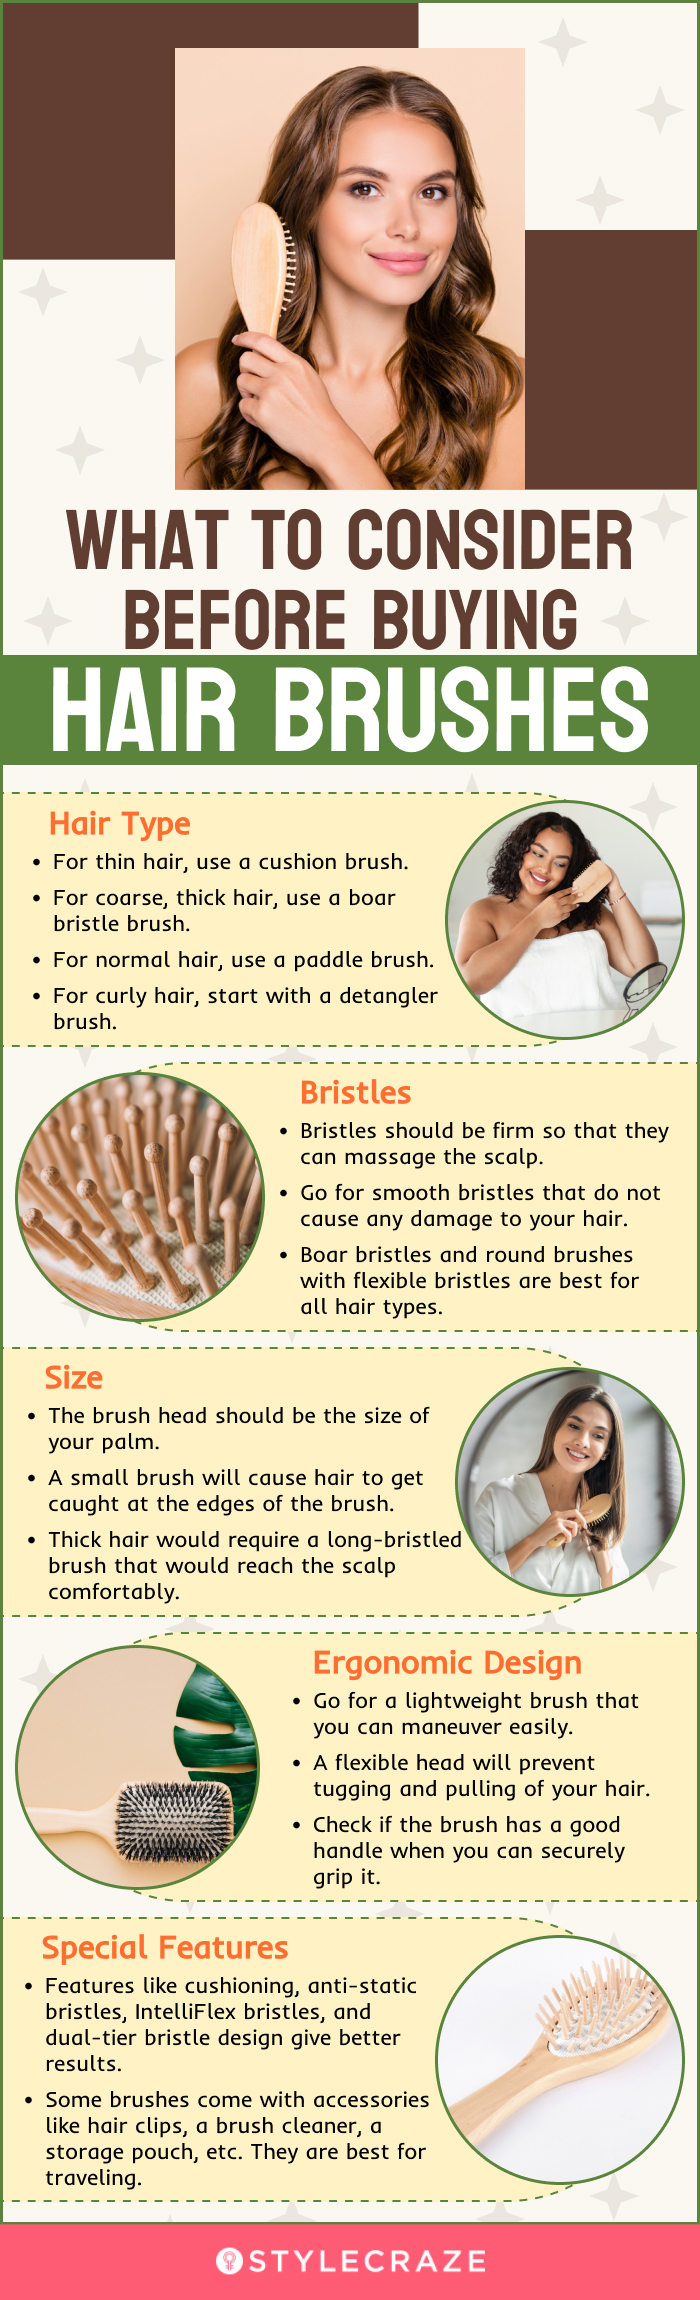 What To Consider Before Buying Hair Brushes  [infographic]